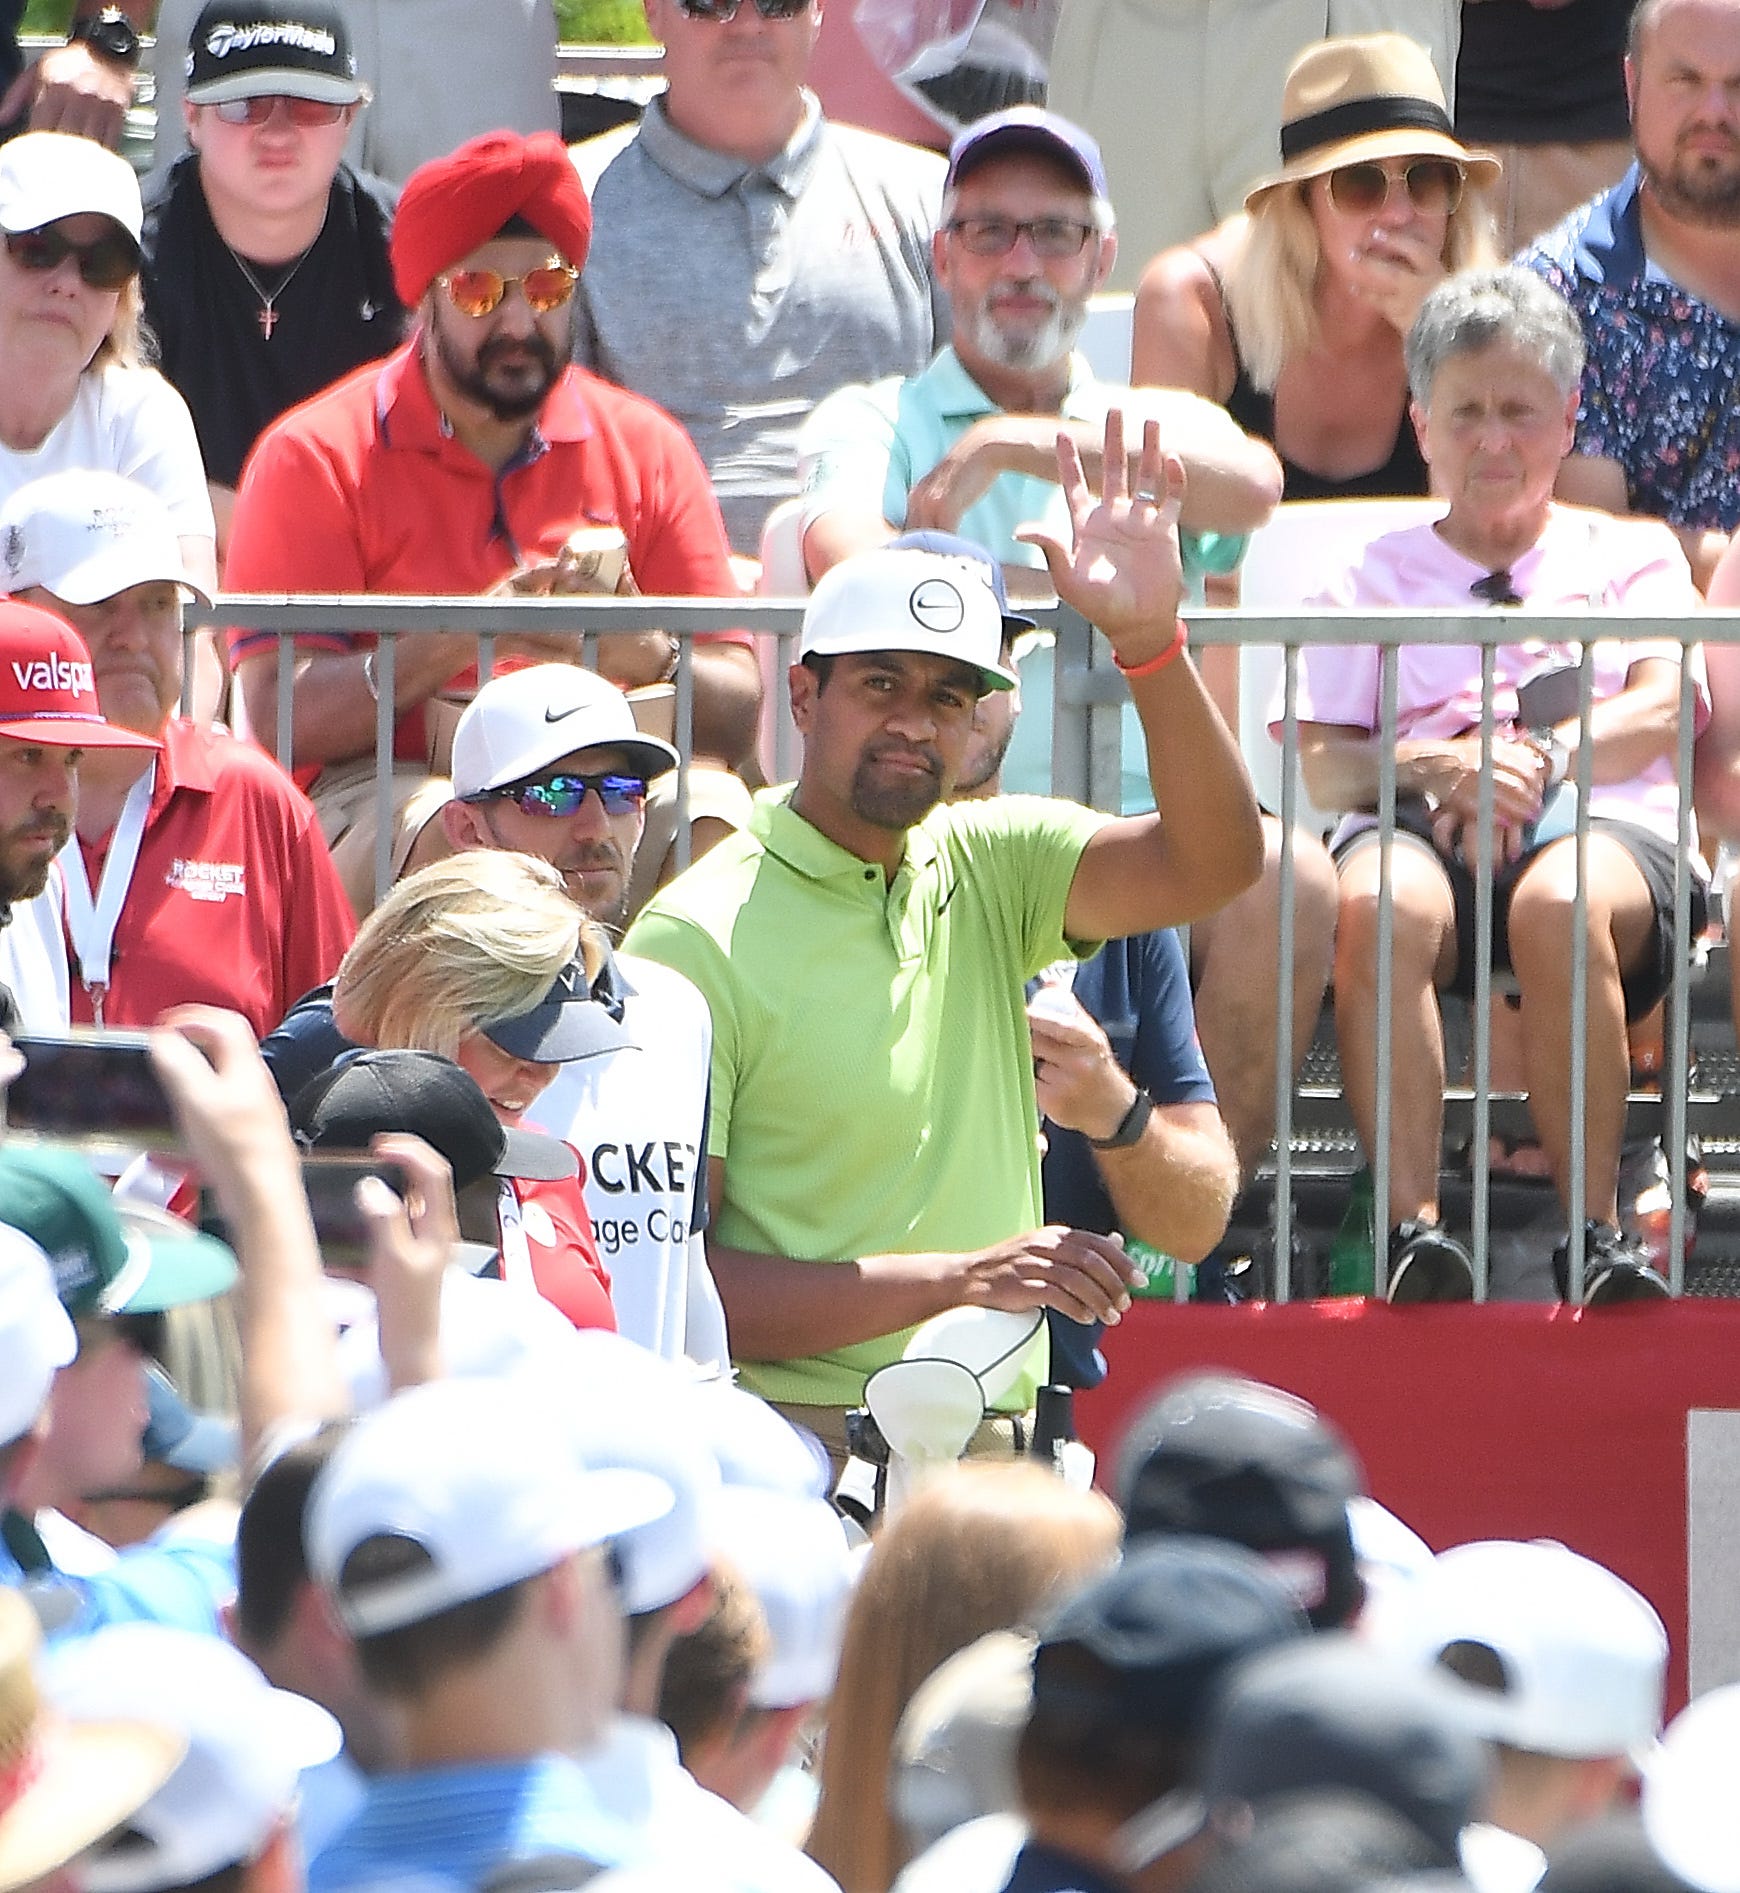 Tony Finau waves to the crowd as he makes his way to the first tee before winning the 2022 Rocket Mortgage Classic in Detroit.